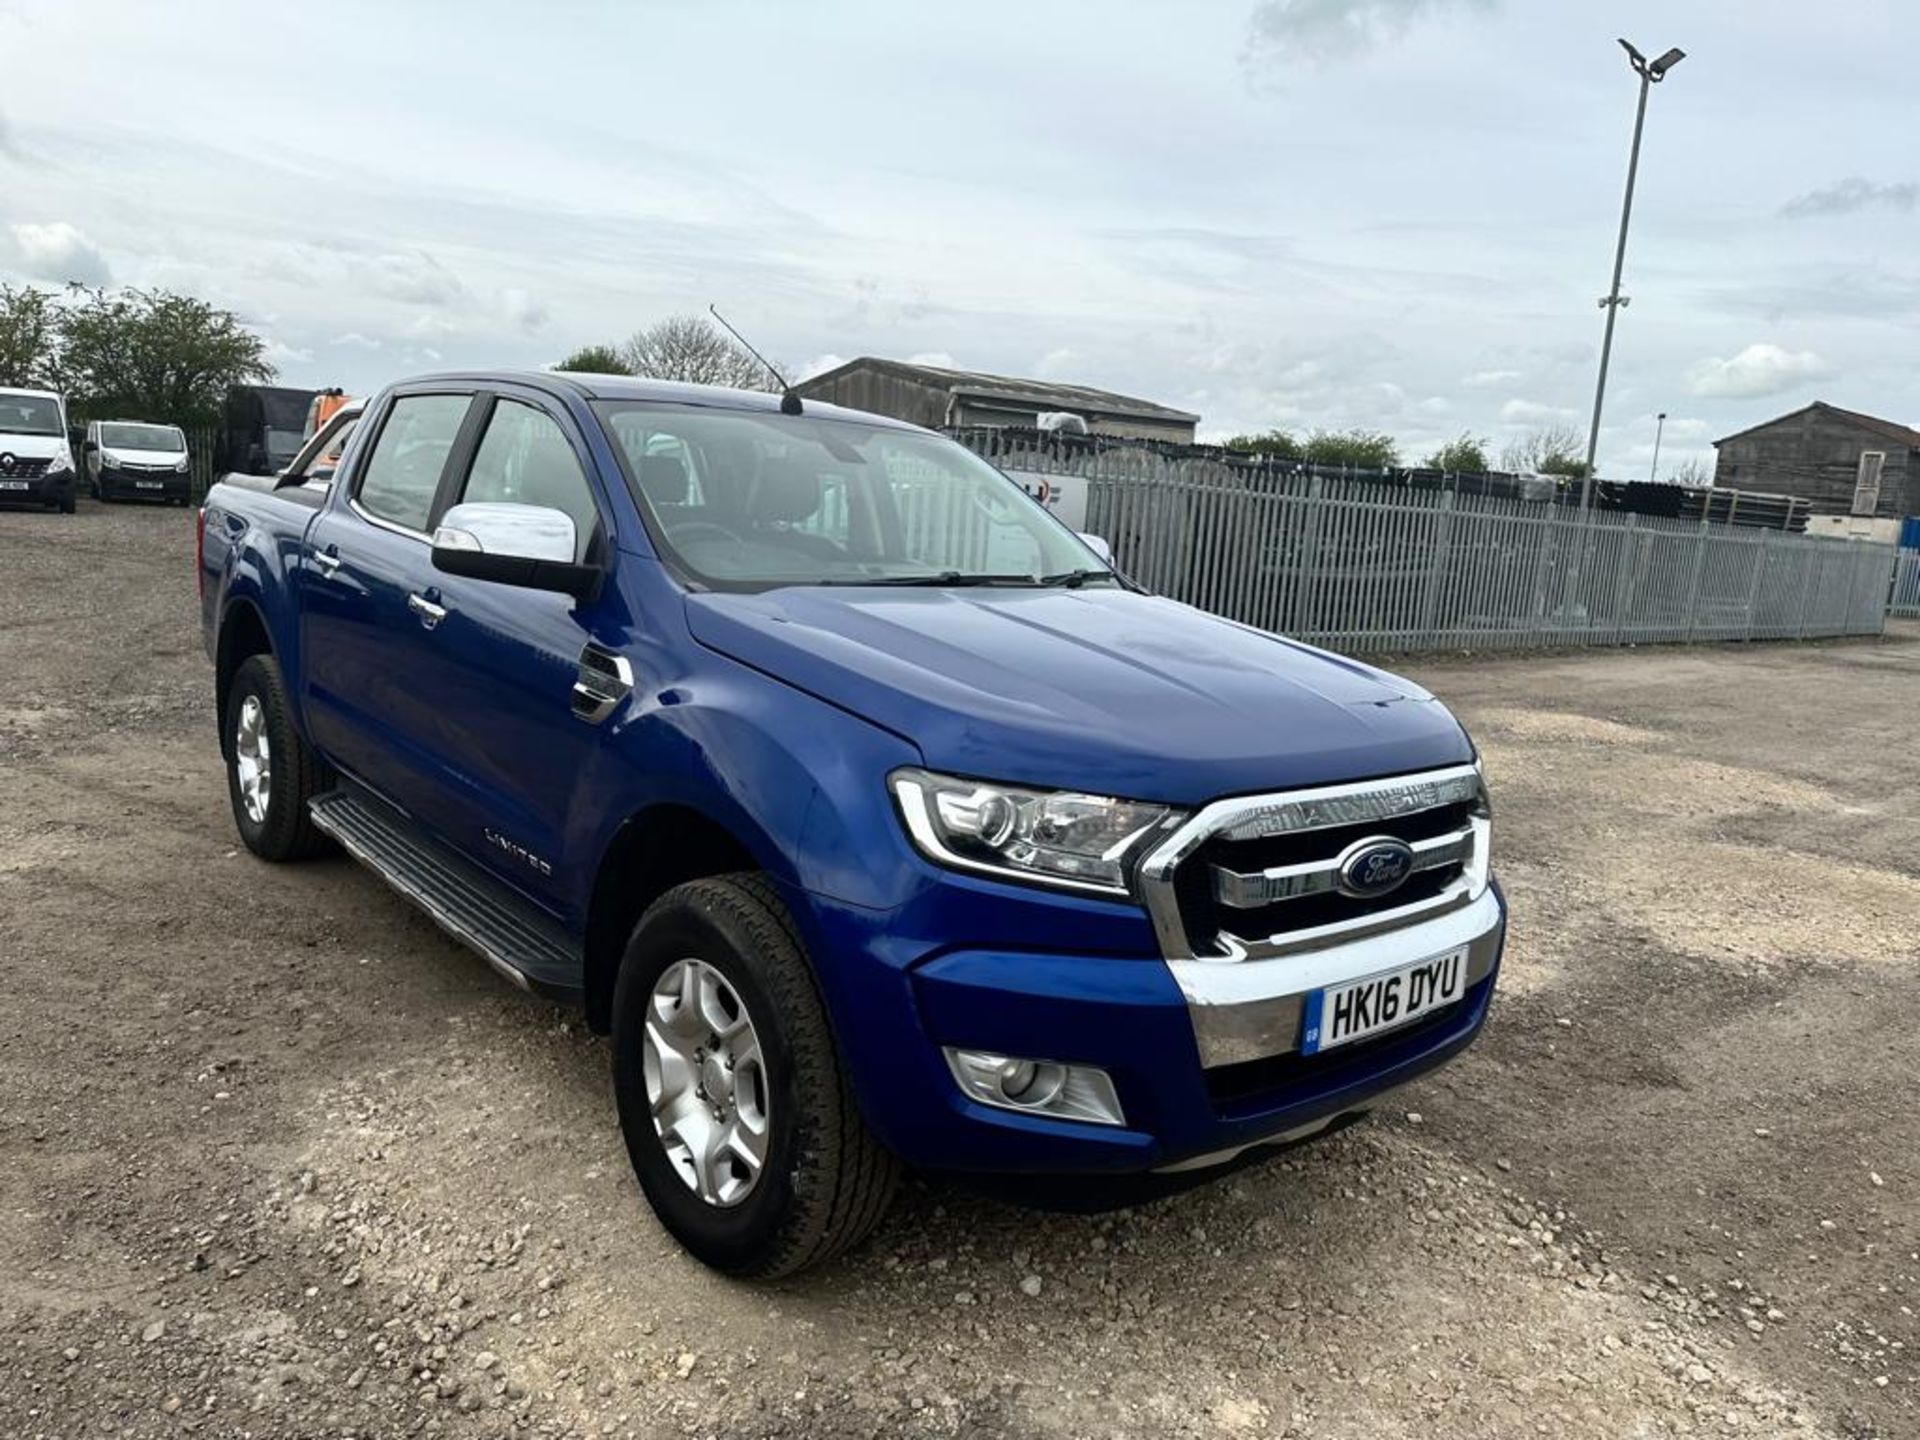 ** ON SALE ** Ford Ranger Limited DCI TDCI 160 4X4 2016 '16 Reg'-Automatic - A/C - -Bluetooth-No Vat - Image 2 of 38